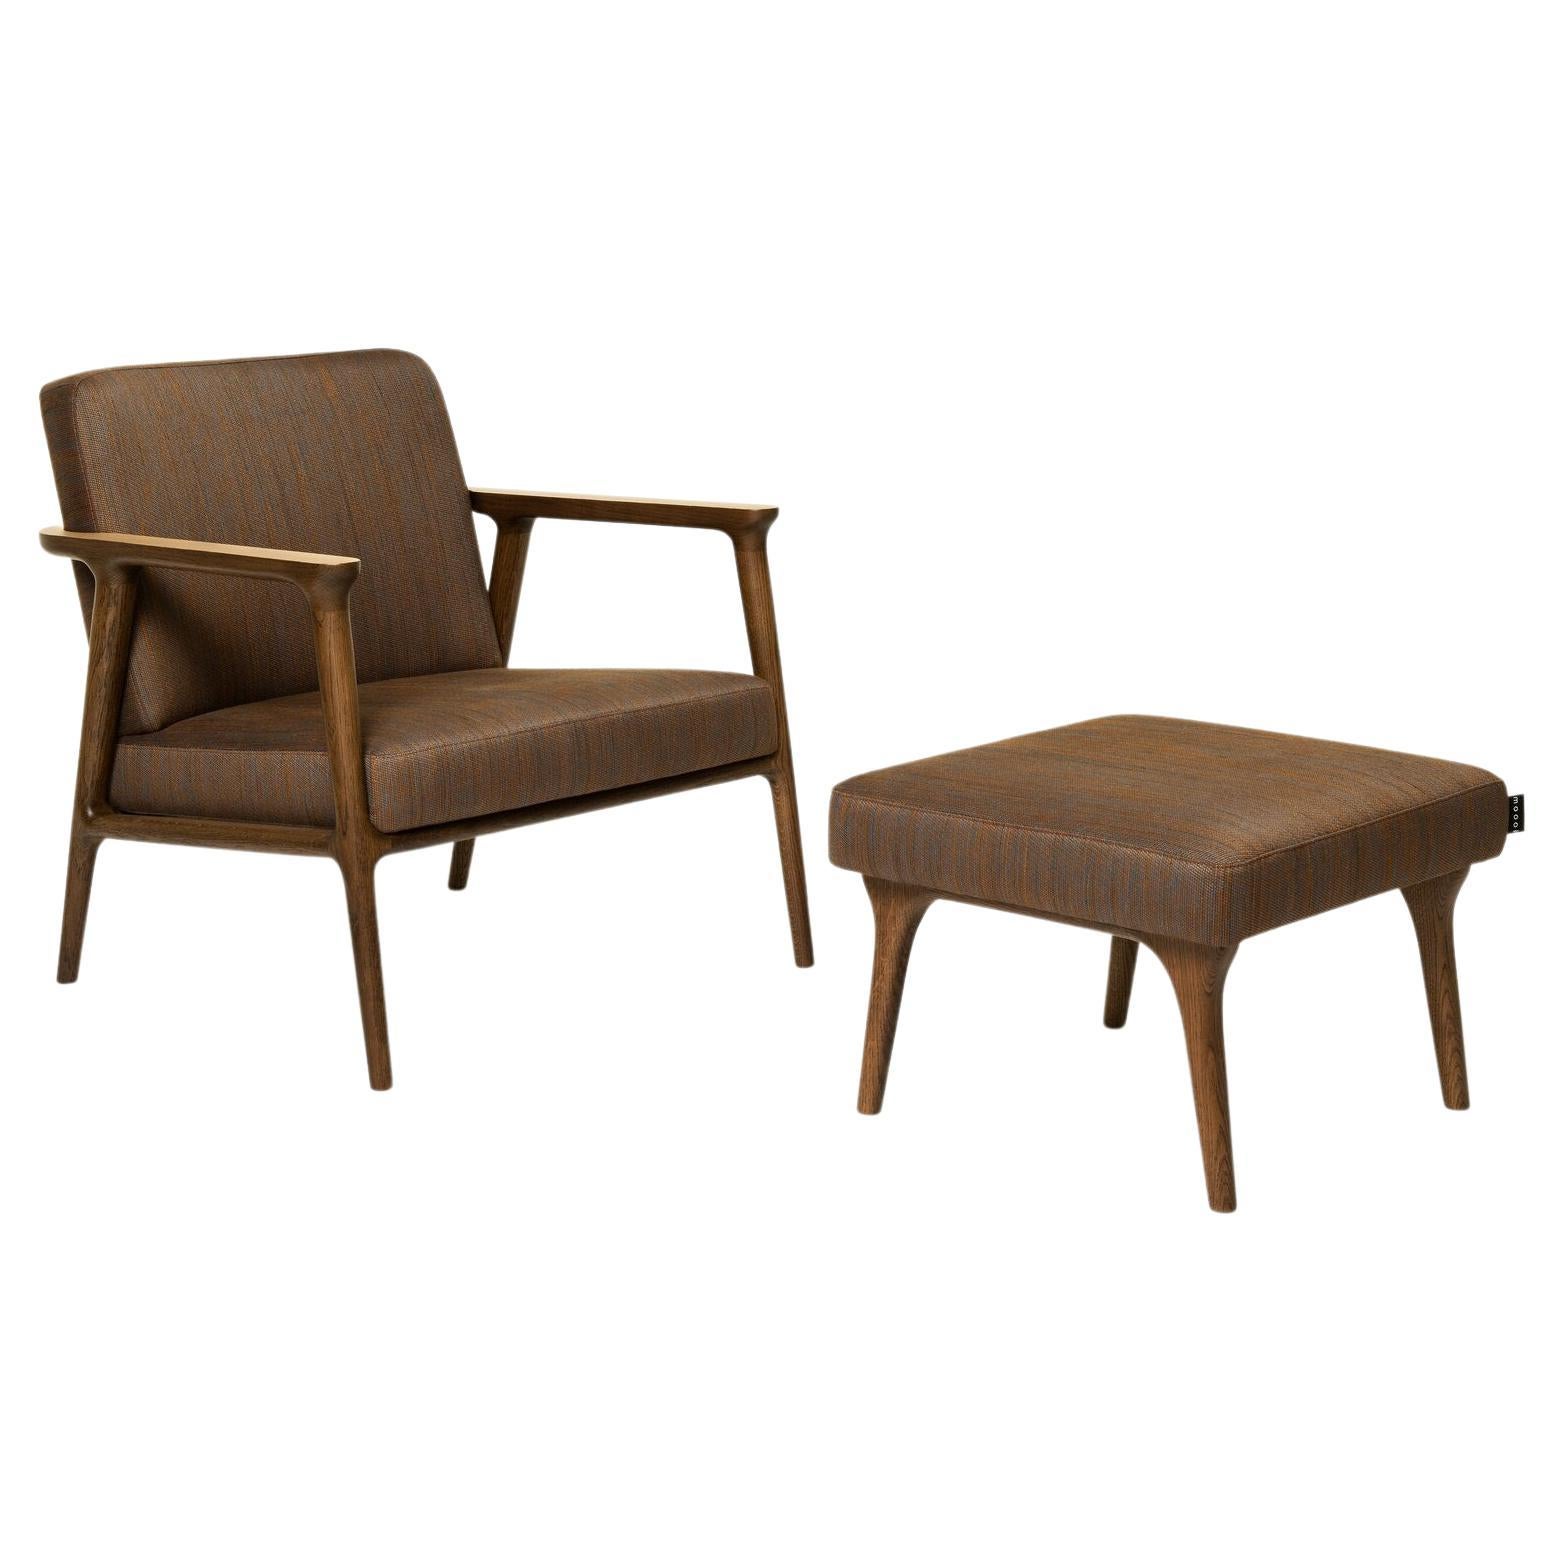 Moooi Zio Lounge Chair in Oray Ray, Copper Seat with Oak Stained Cinnamon Frame